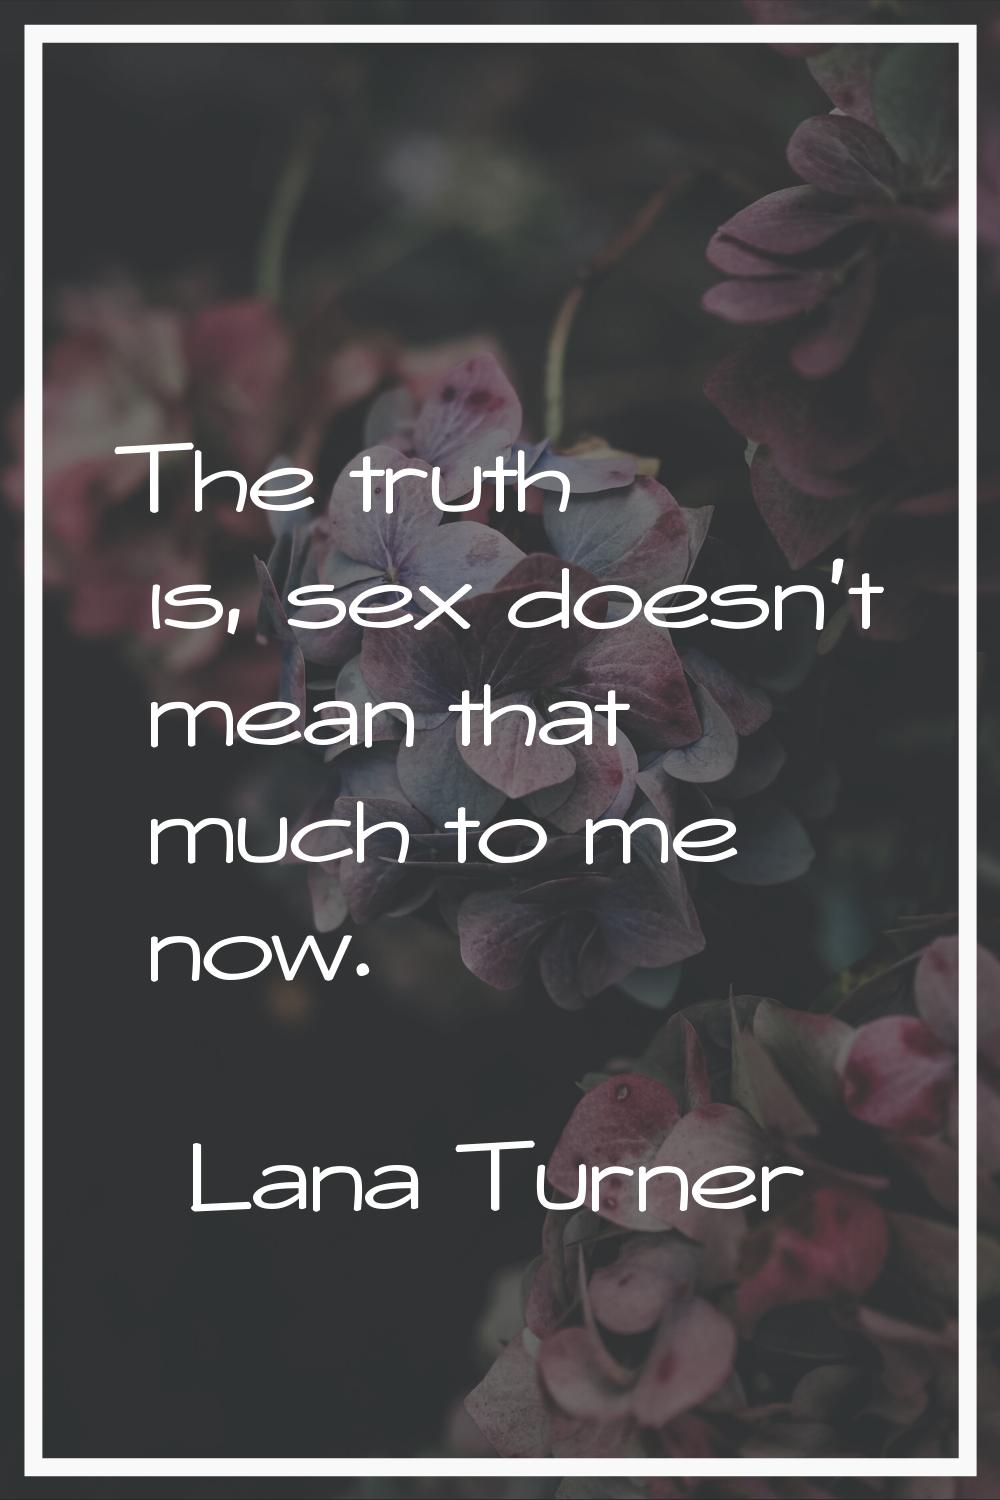 The truth is, sex doesn't mean that much to me now.